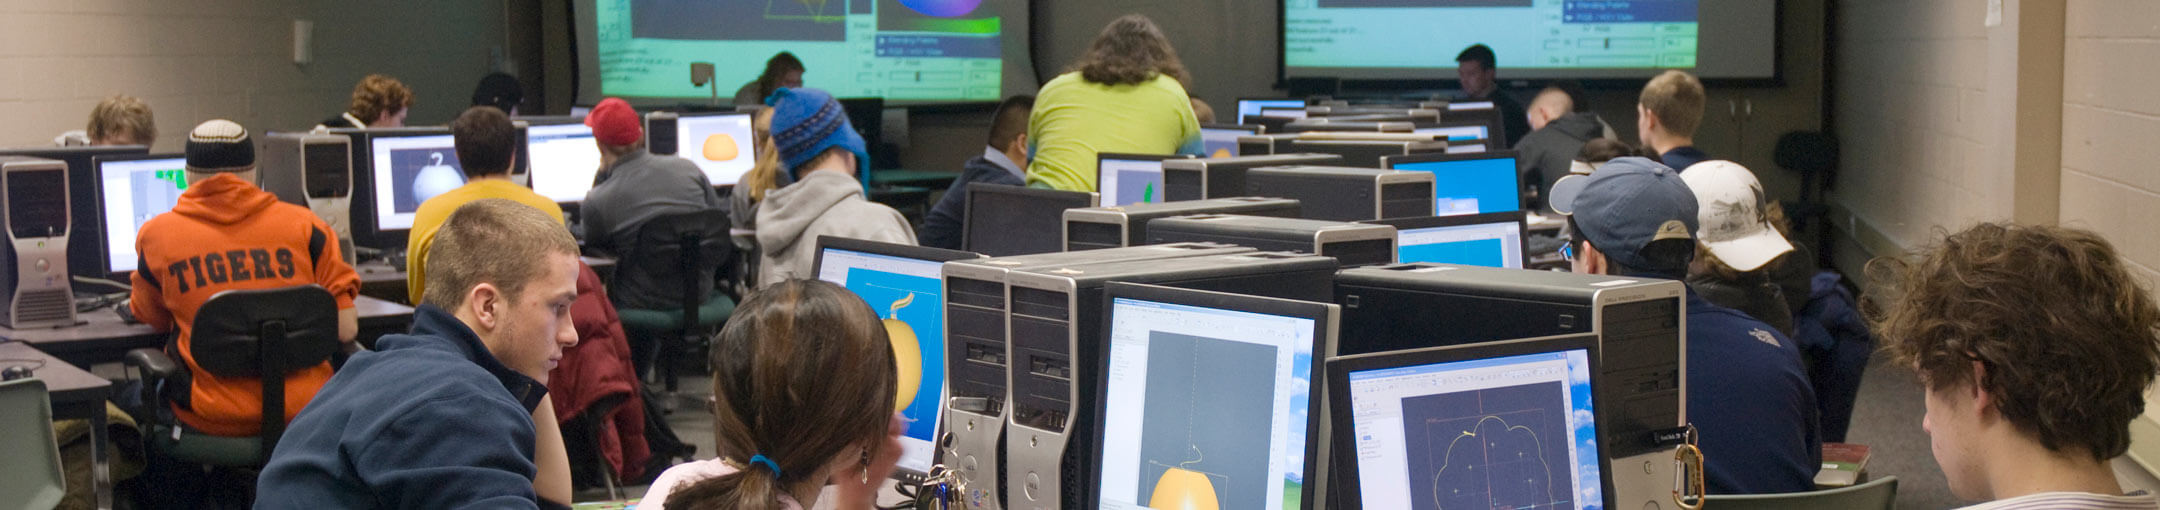 Group of students working in a computer lab with two projectors.